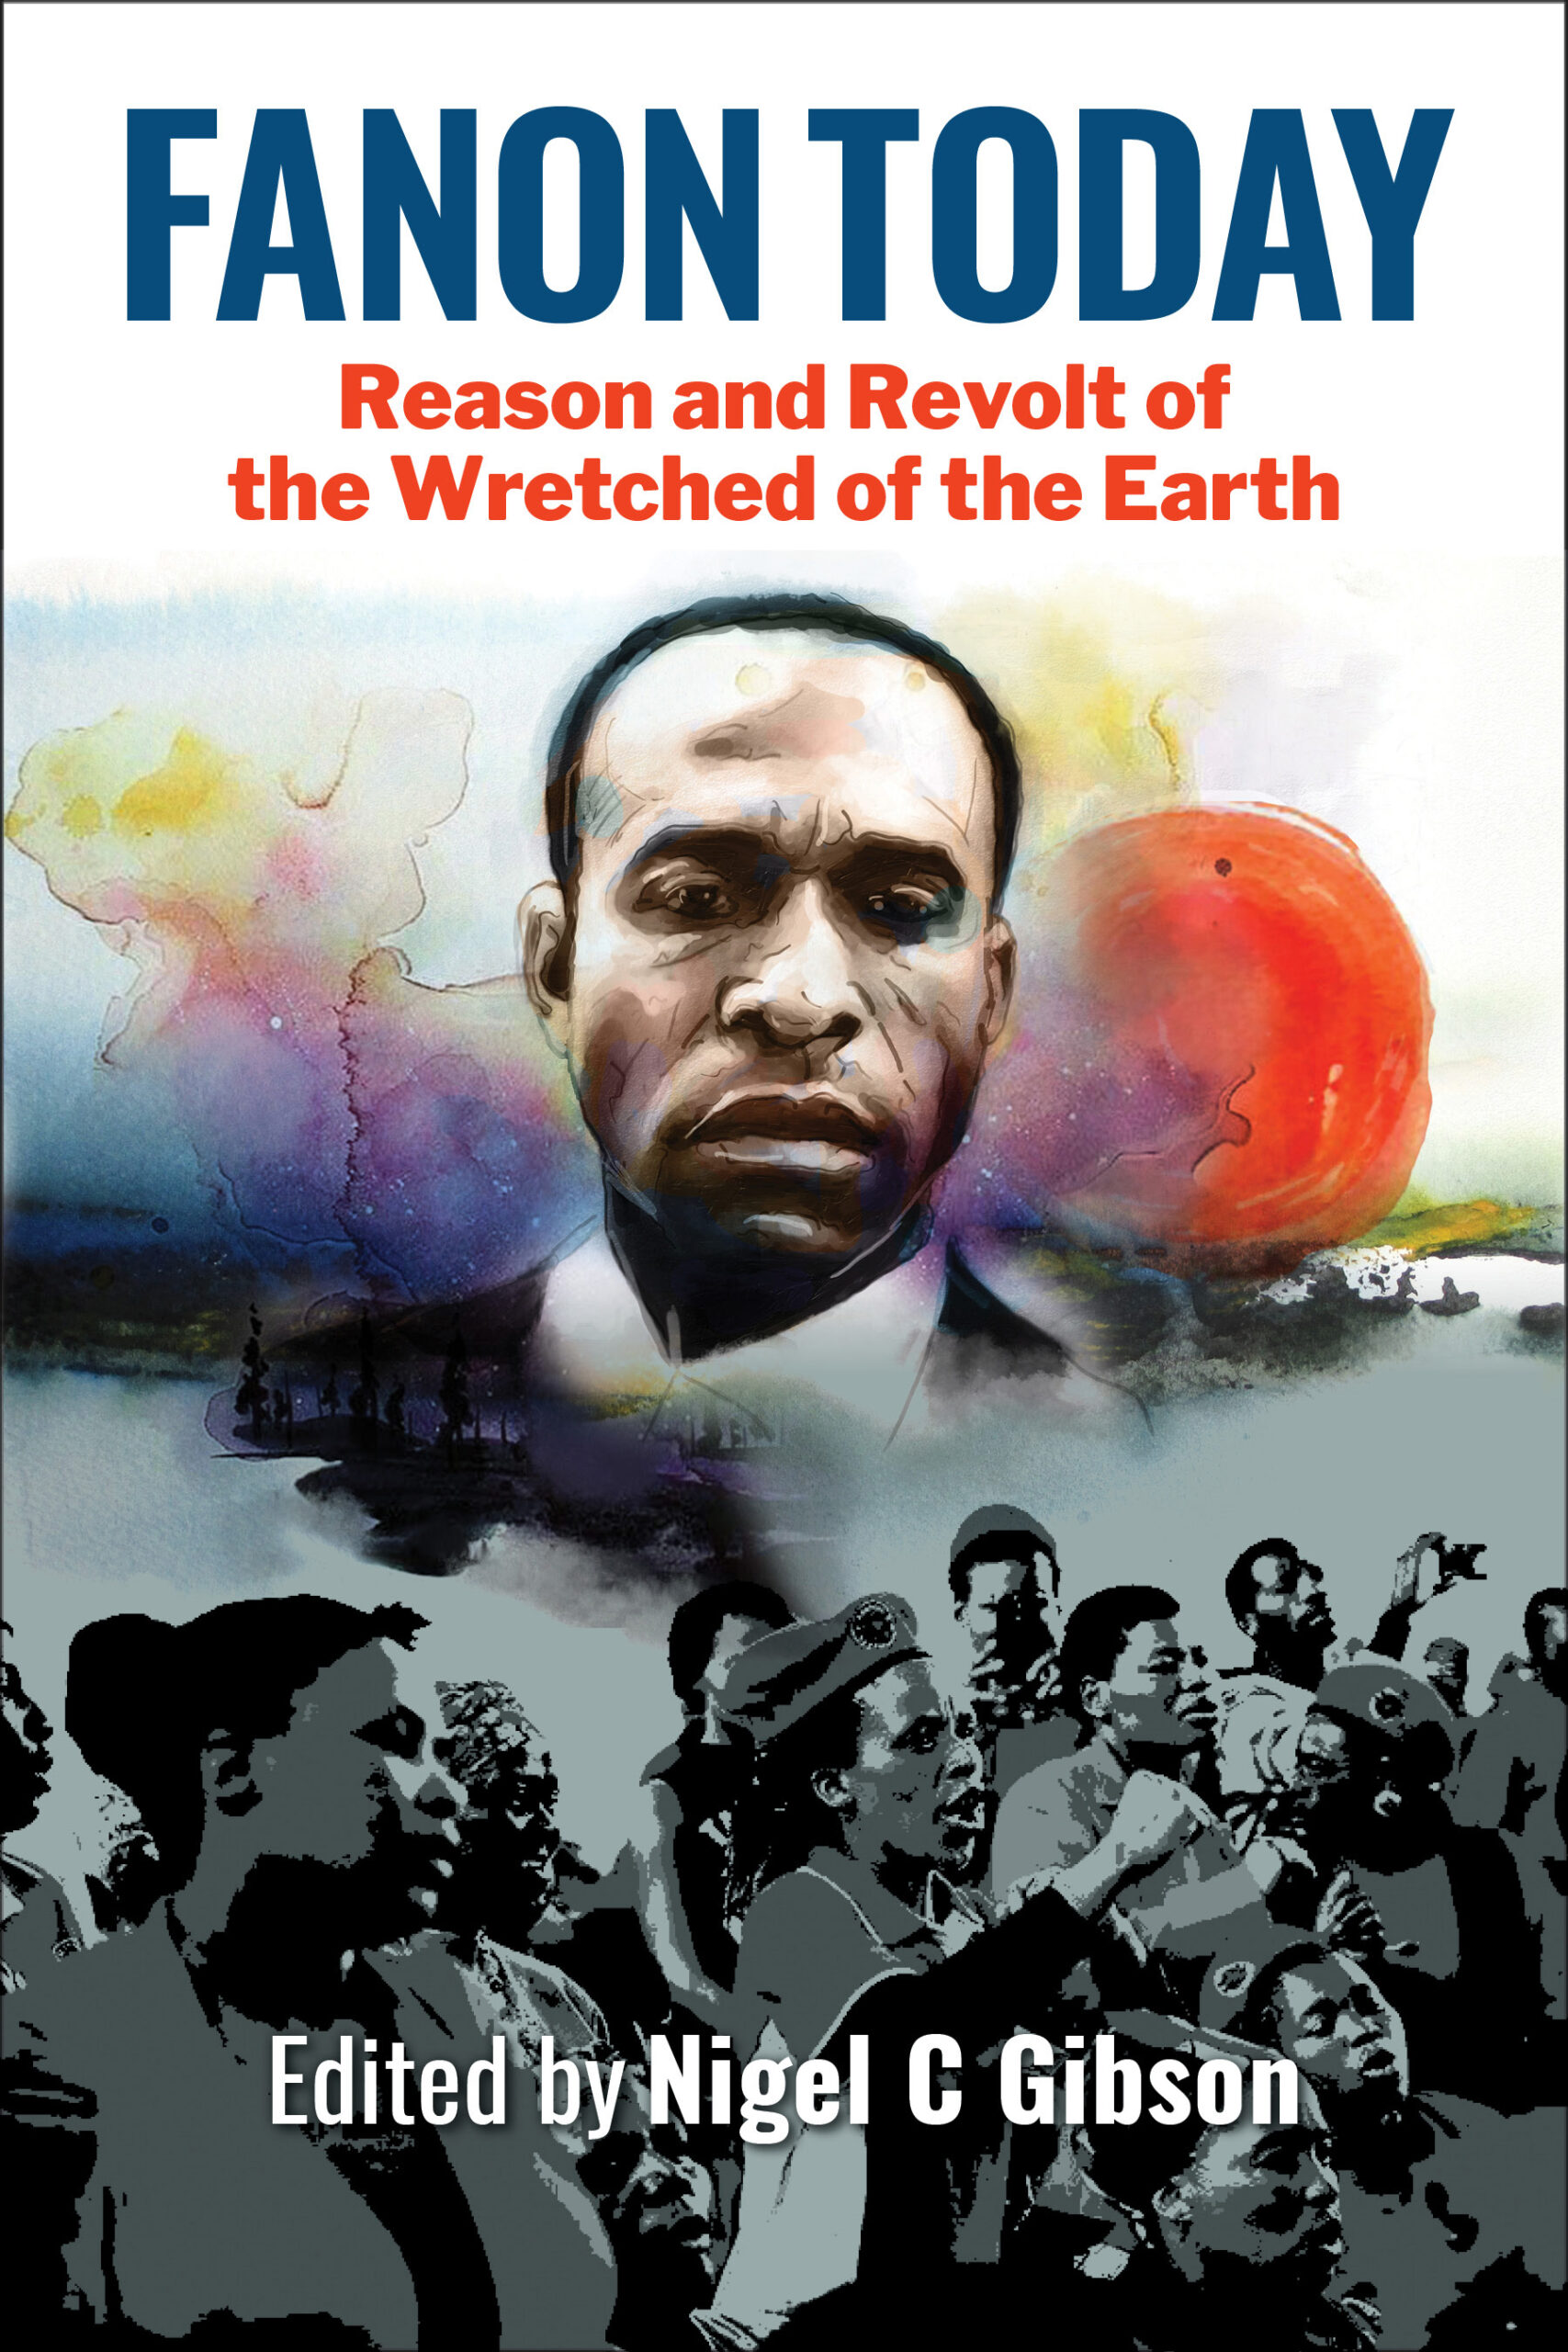 the　Wretched　Fanon　of　Revolt　and　Earth　Today:　DarajaPress　the　Reason　of　–